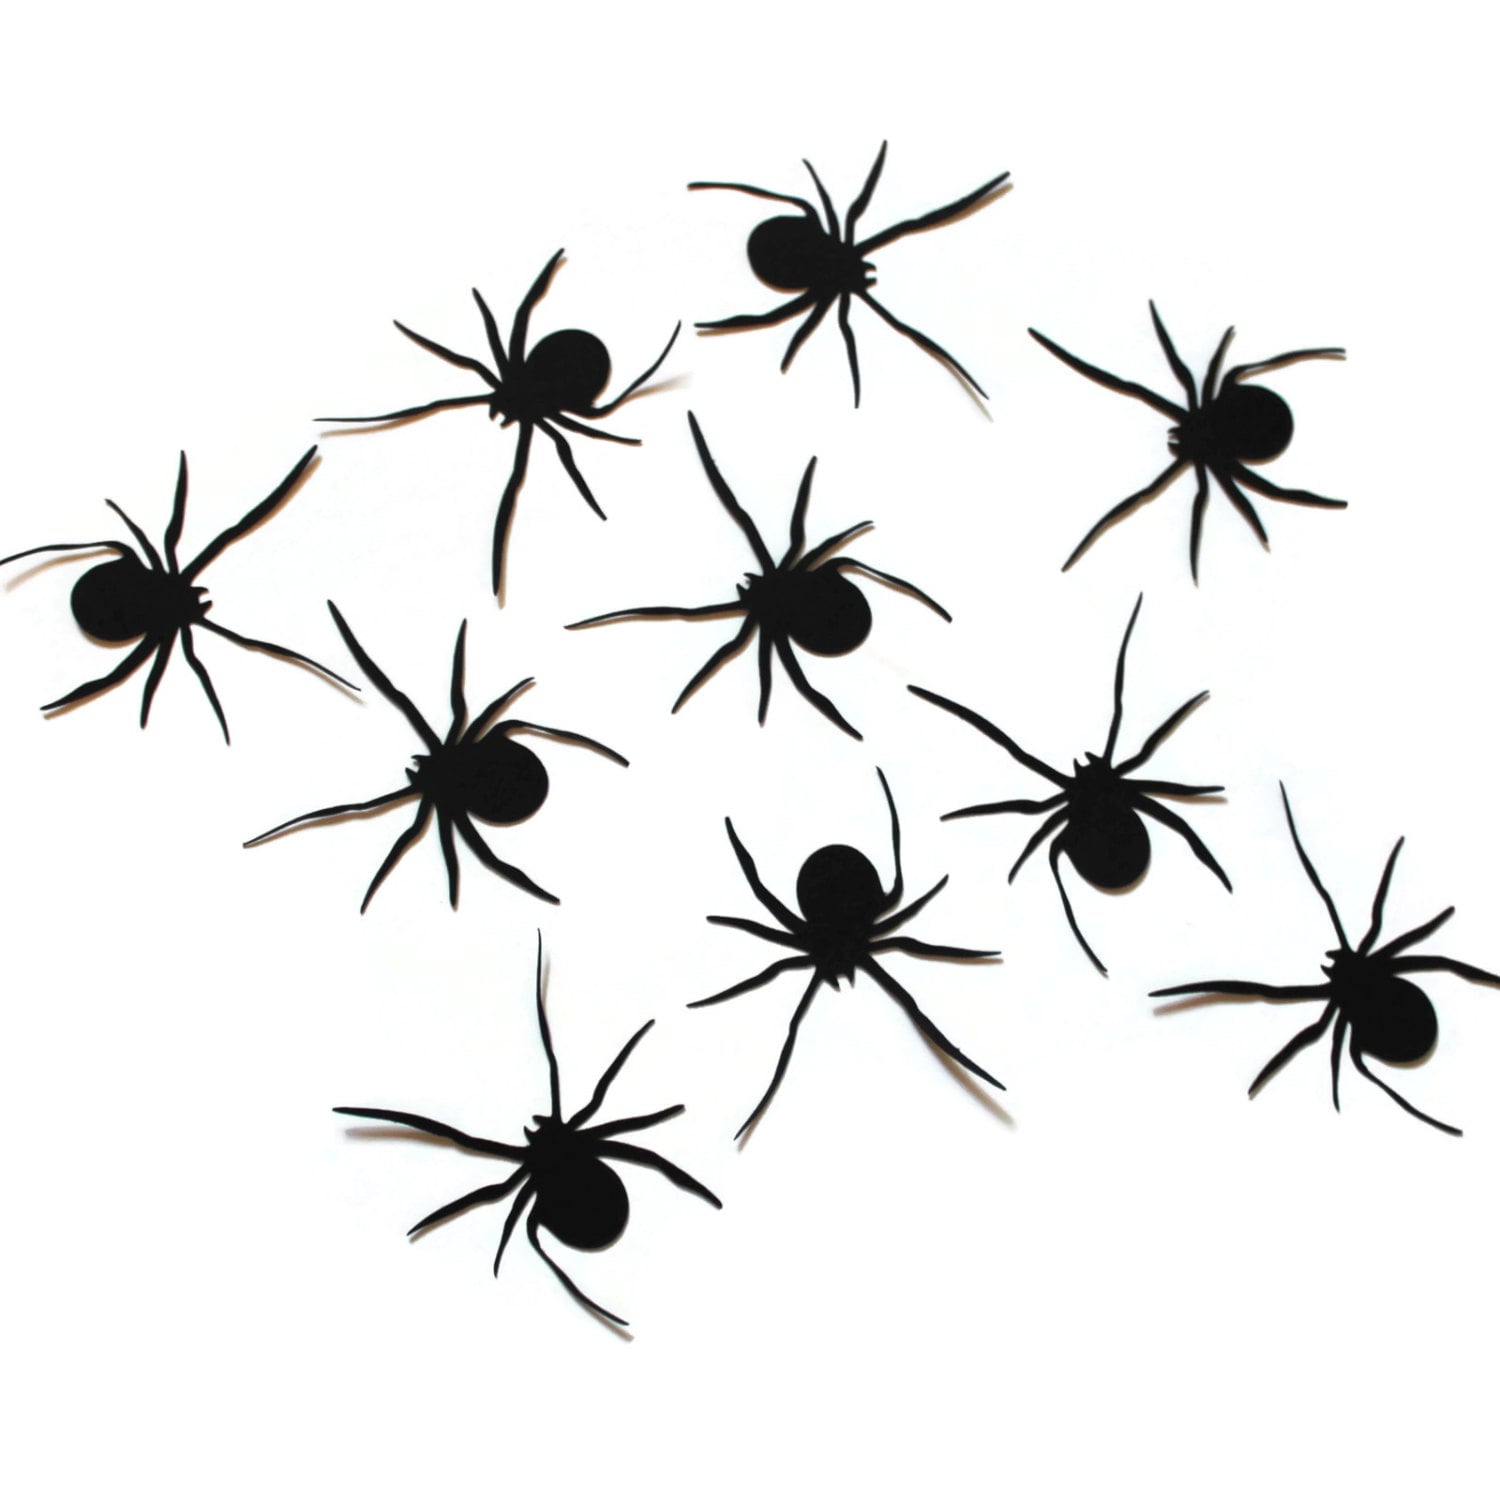 Spider web with spider die cut Embellishments 5 sets/ 10 pc black card stock…